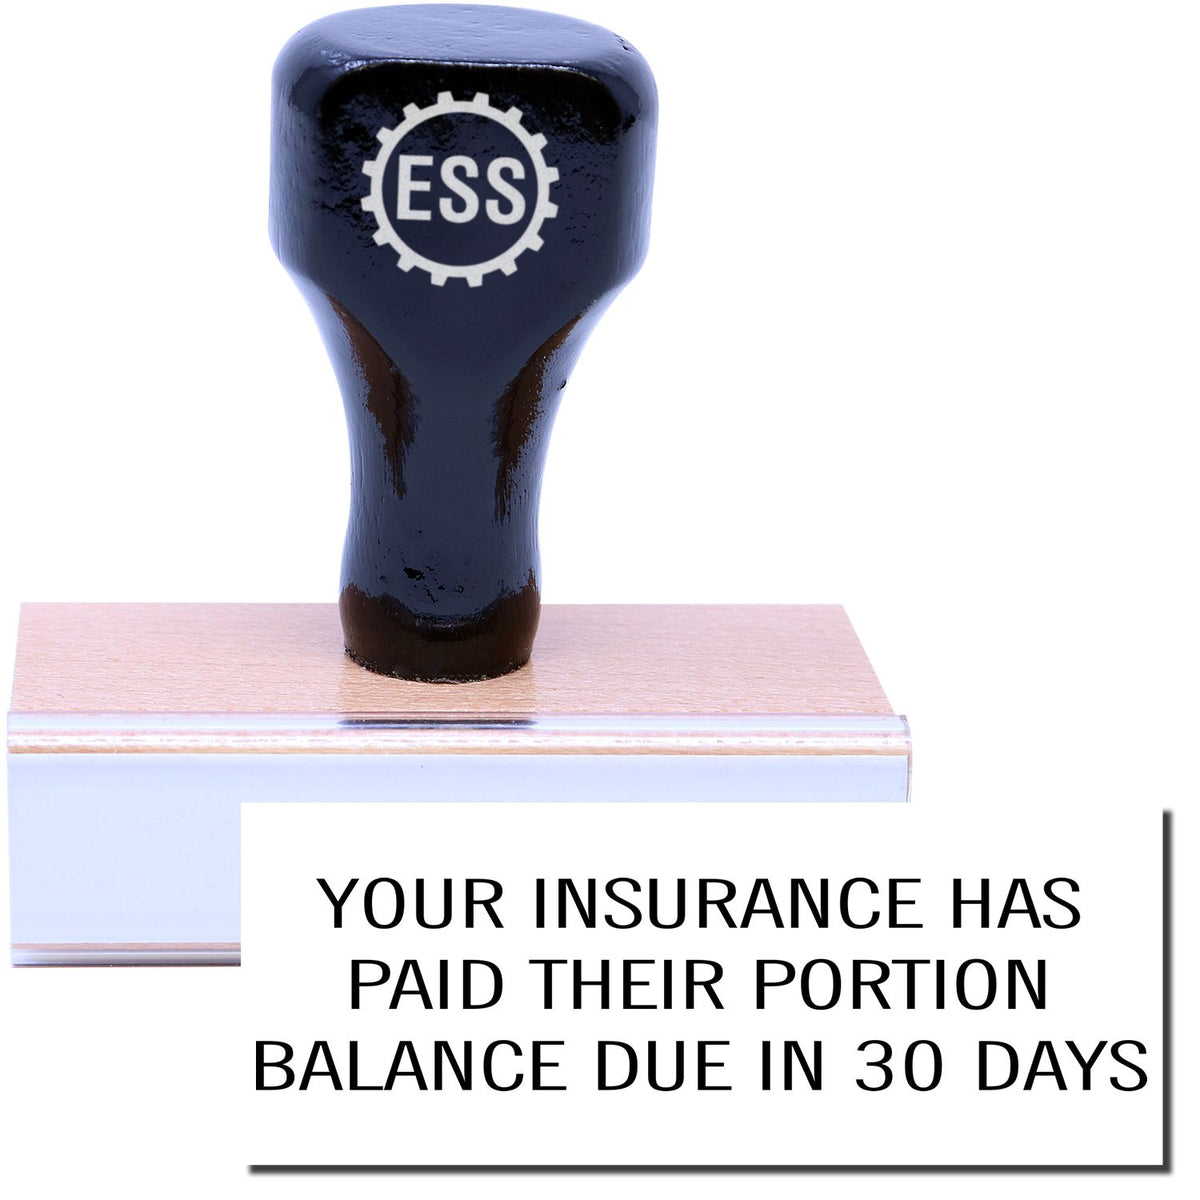 A stock office rubber stamp with a stamped image showing how the text &quot;YOUR INSURANCE HAS PAID THEIR PORTION BALANCE DUE IN 30 DAYS&quot; in a large font is displayed after stamping.